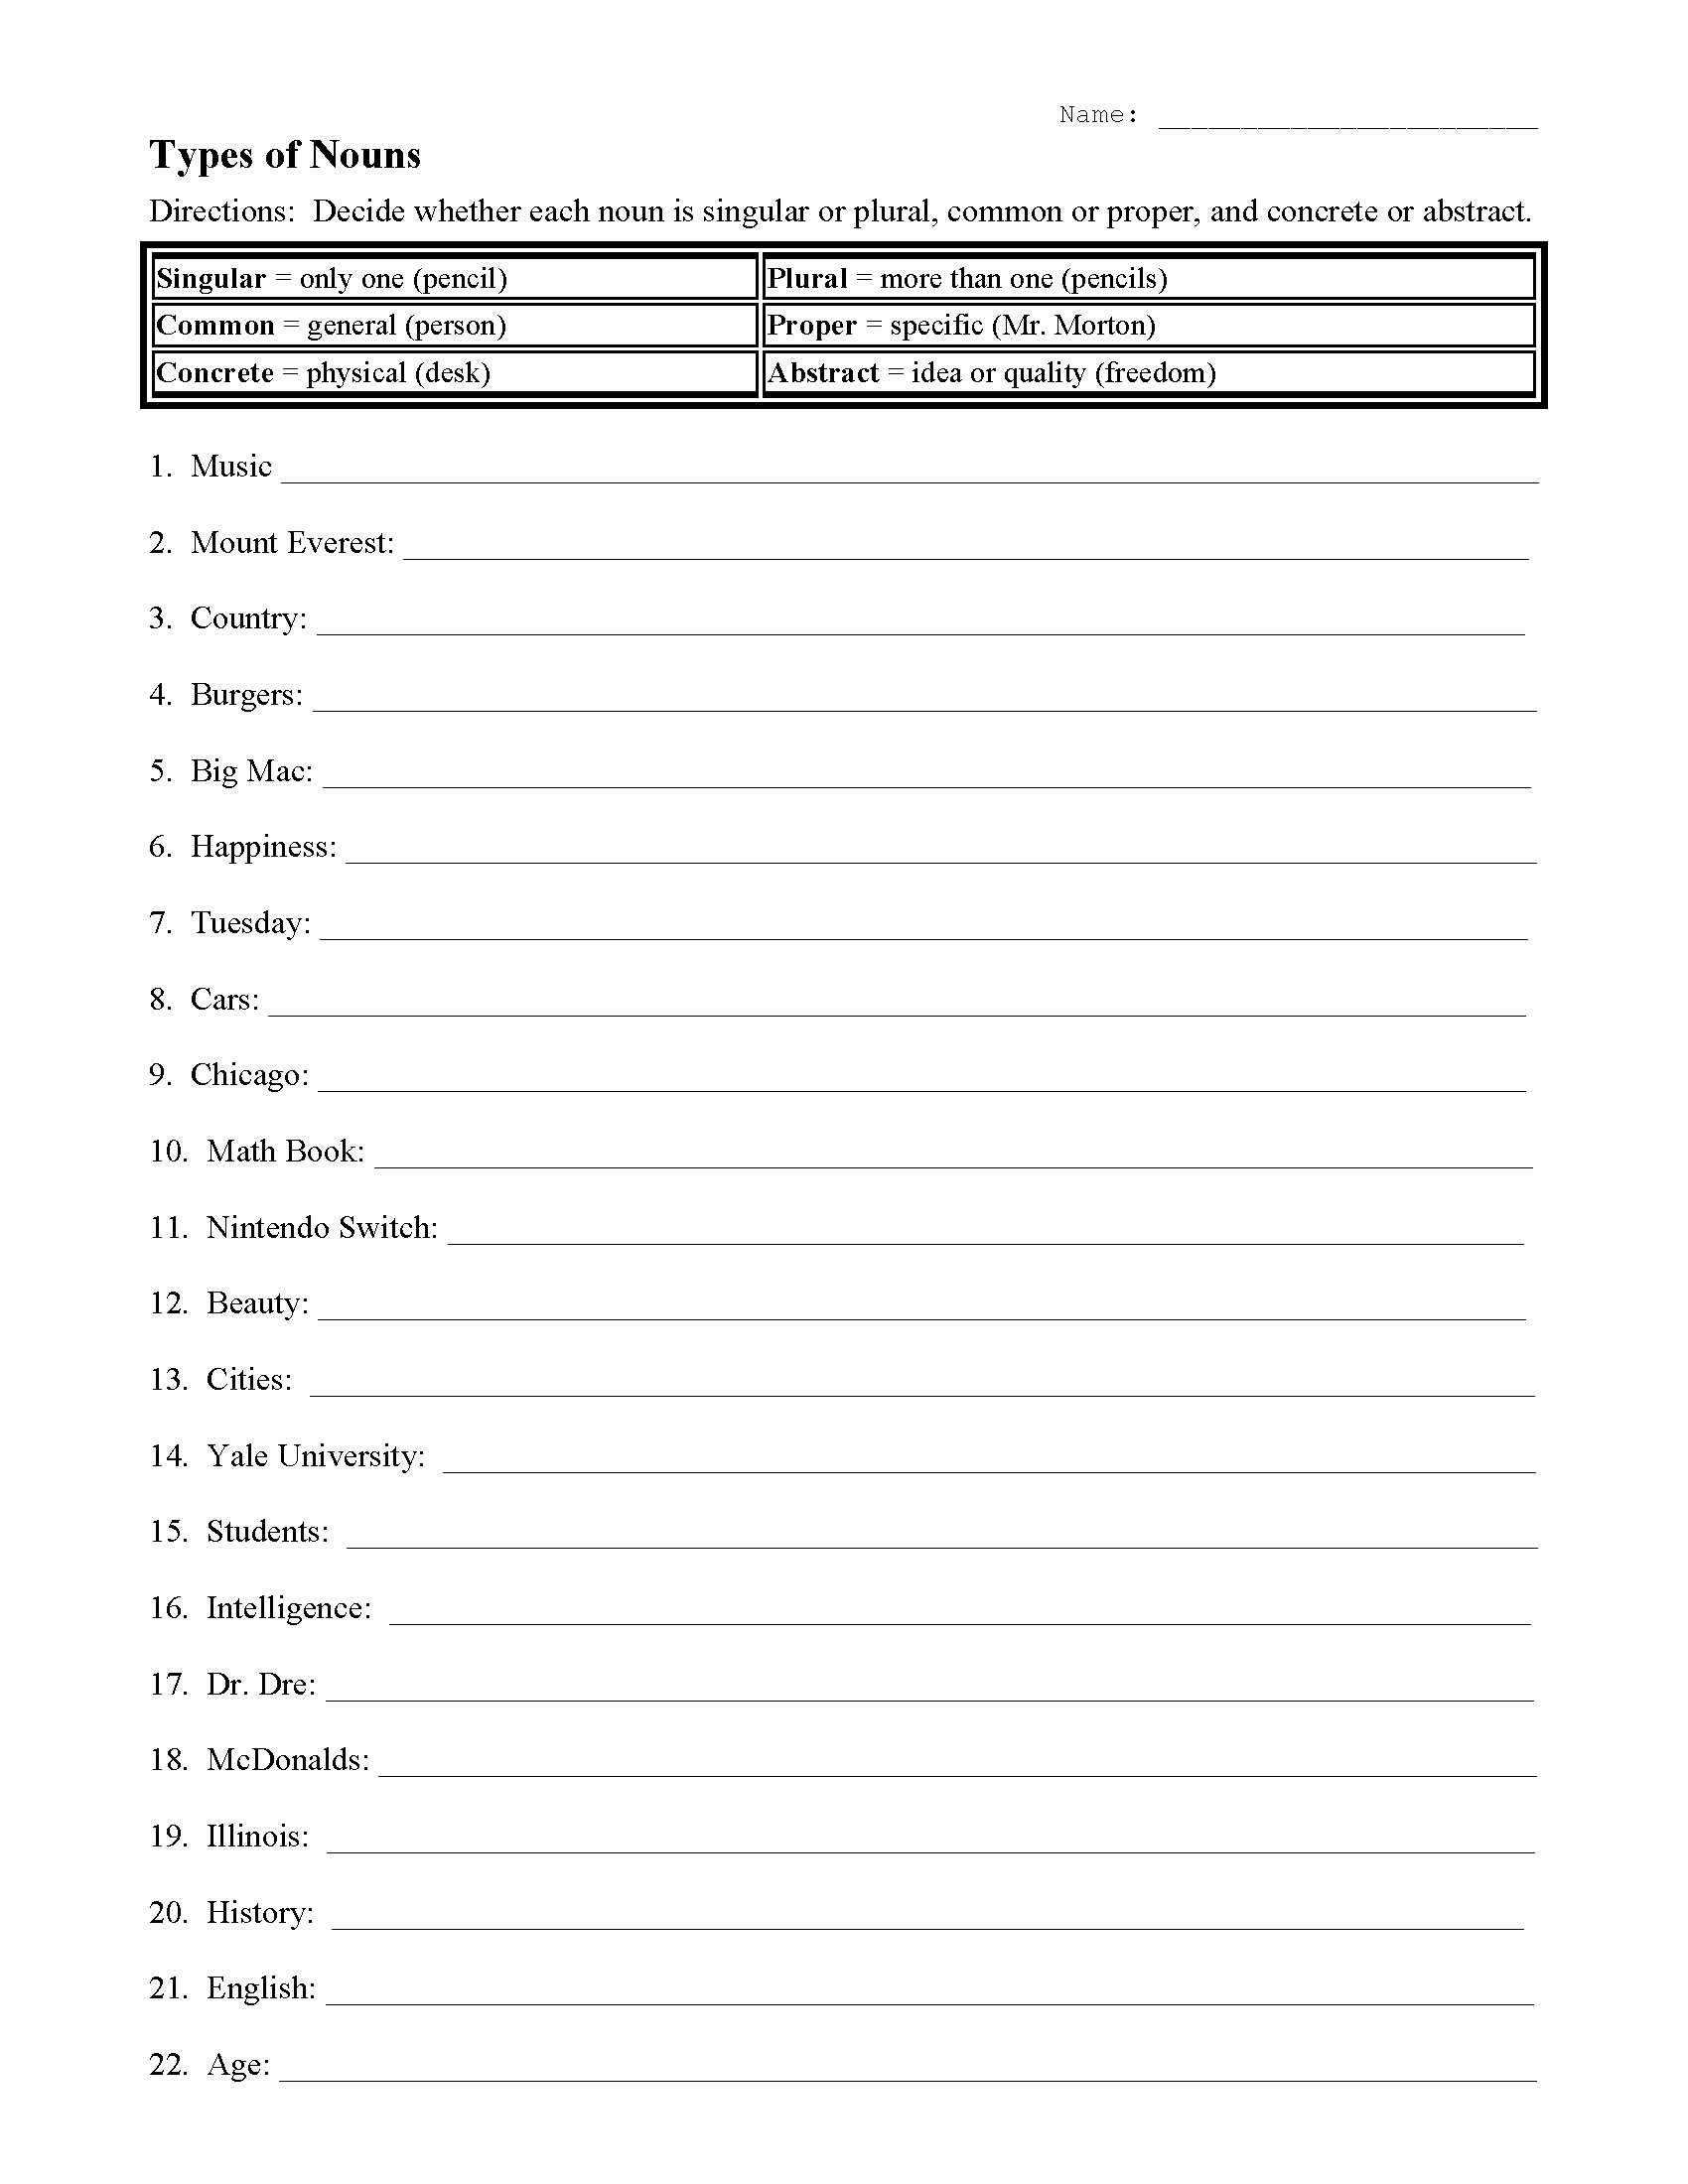 This is a preview image of the Noun Types Worksheet 2.